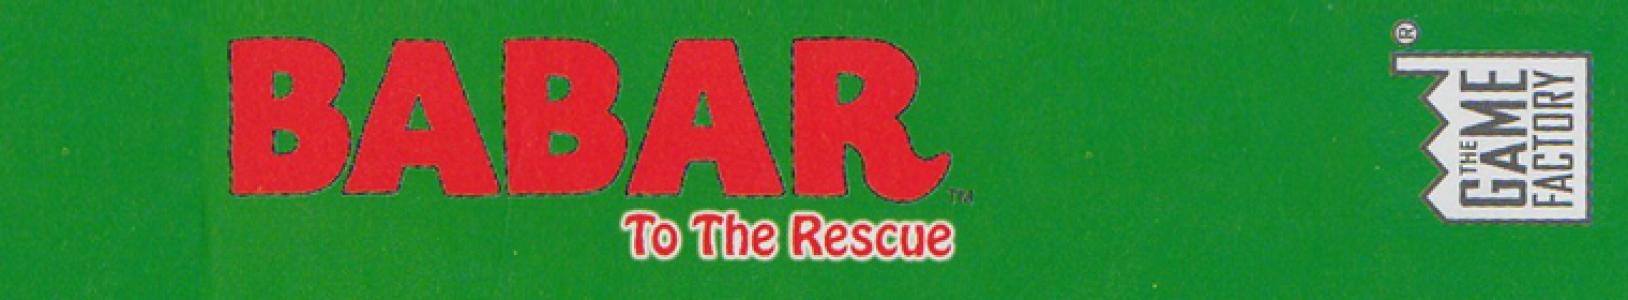 Babar to the Rescue banner